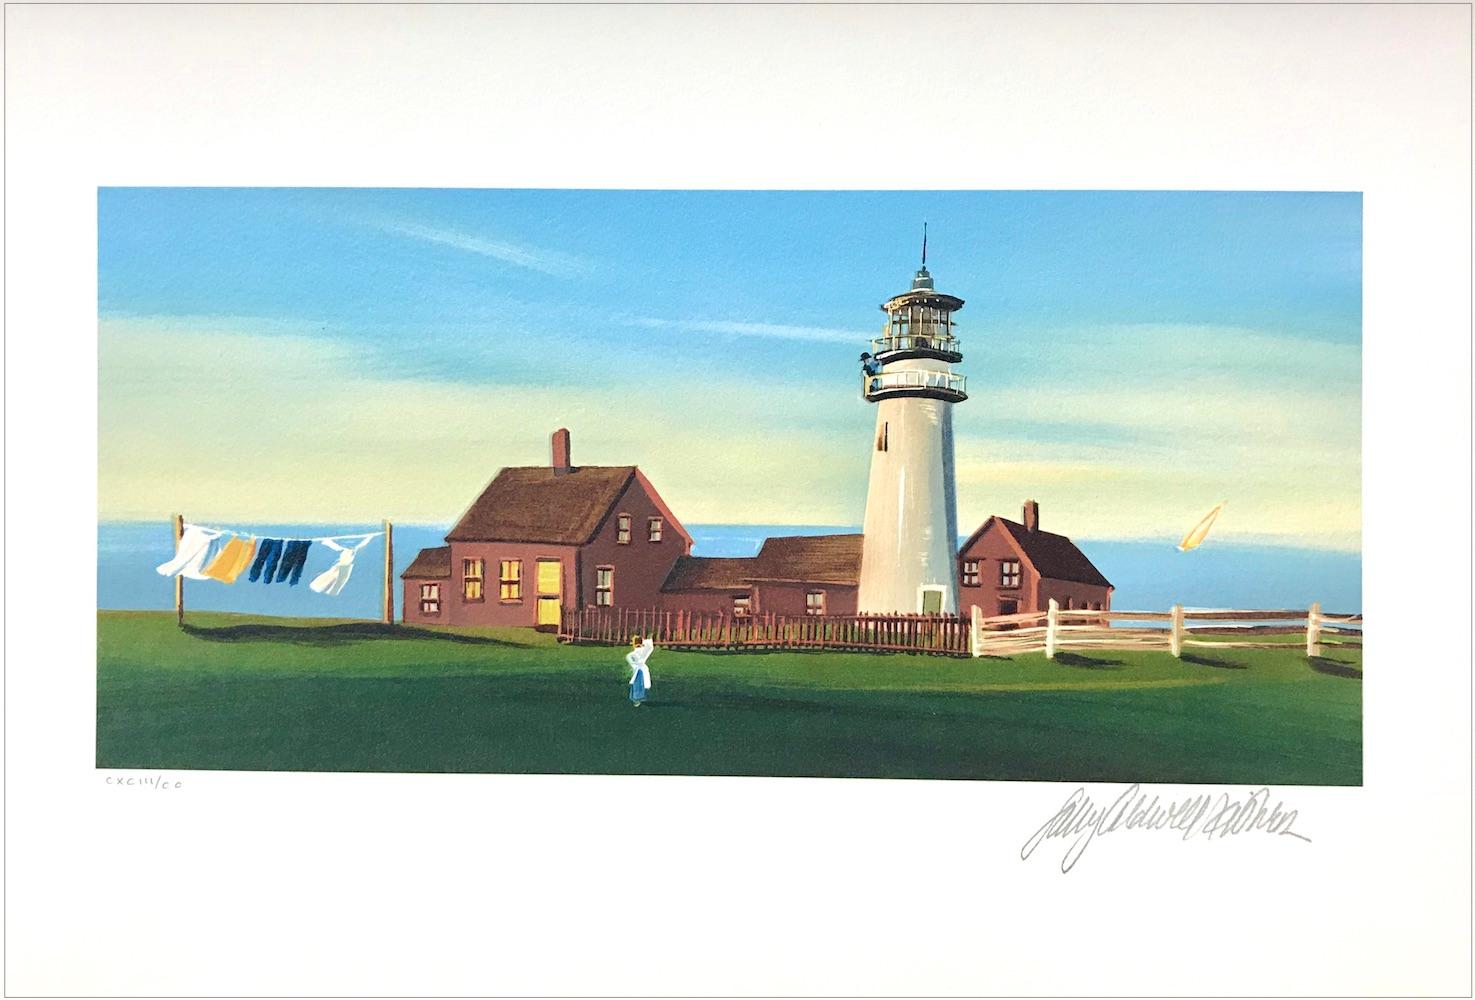 Sally Caldwell-Fisher Figurative Print - DAILY CHORES Signed Lithograph, New England Summer, Ocean View Lighthouse